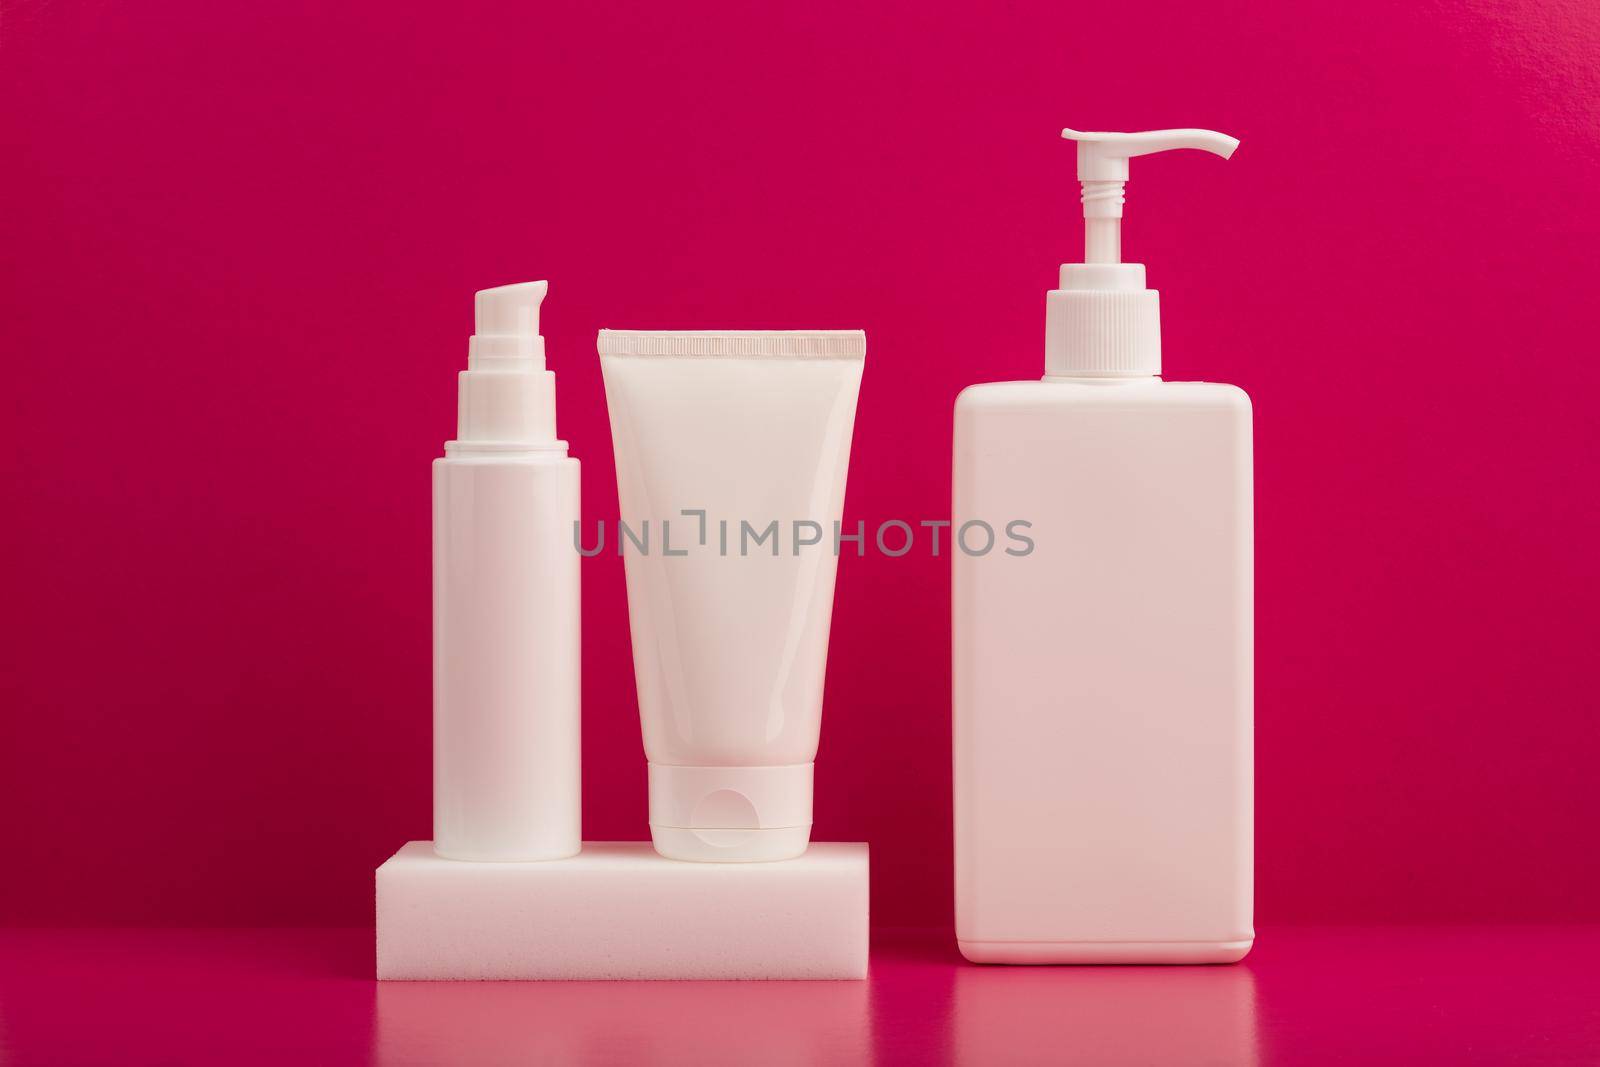 Still life with a set of creams or lotions on white podium against pink background on pink table. Concept of beauty treatment and every day skin routine